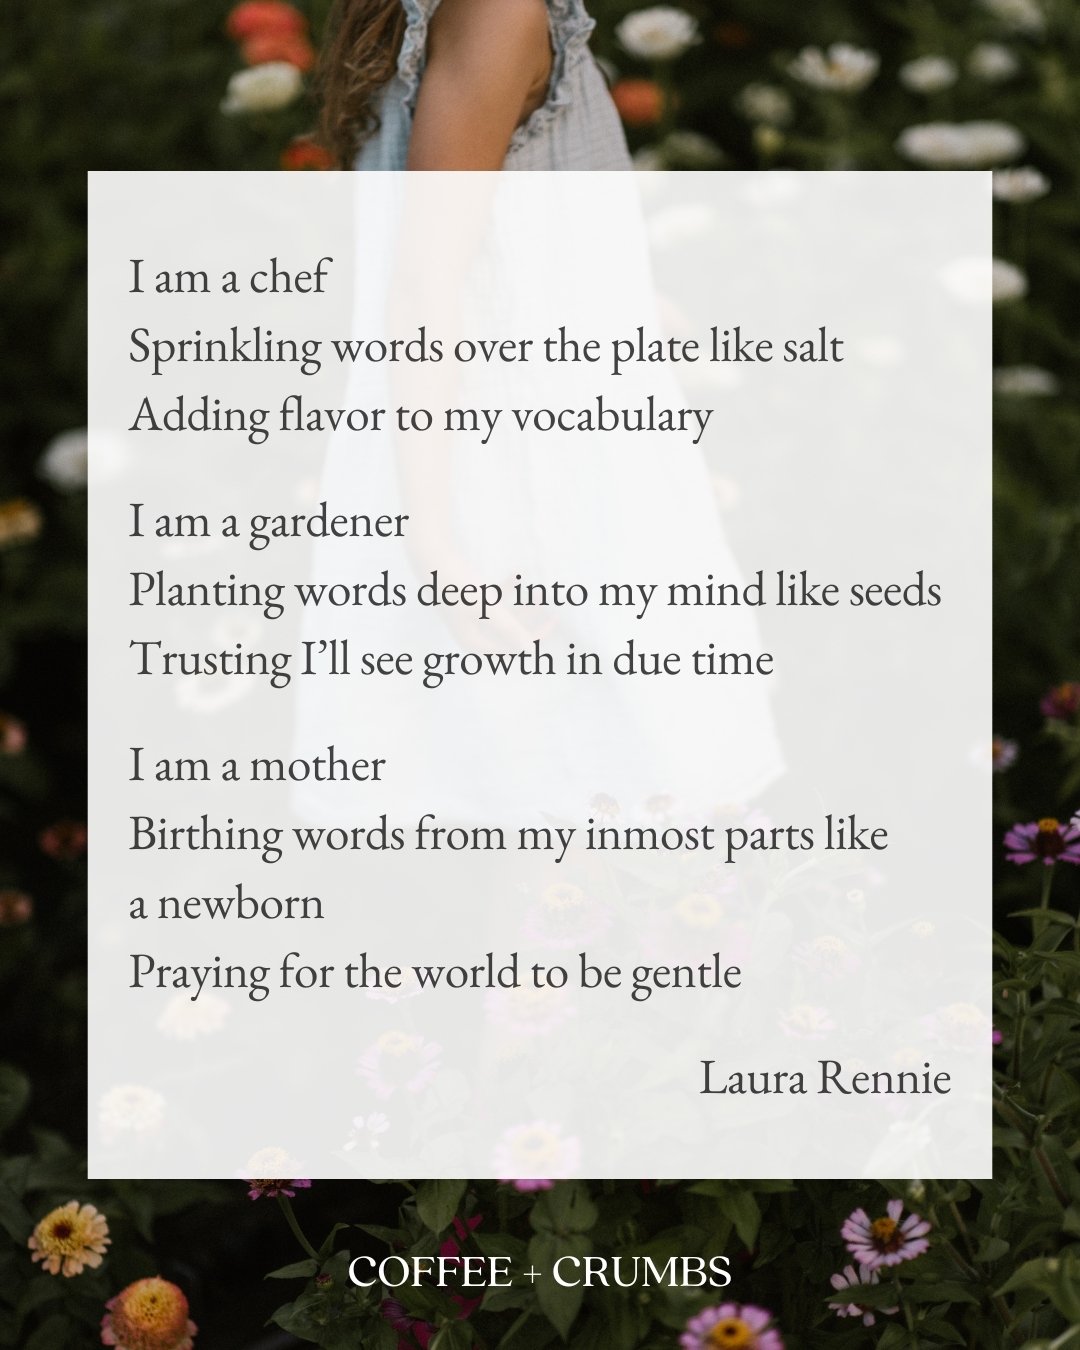 I am a chef
Sprinkling words over the plate like salt
Adding flavor to my vocabulary

I am a gardener
Planting words deep into my mind like seeds
Trusting I&rsquo;ll see growth in due time

I am a mother
Birthing words from my inmost parts like a new